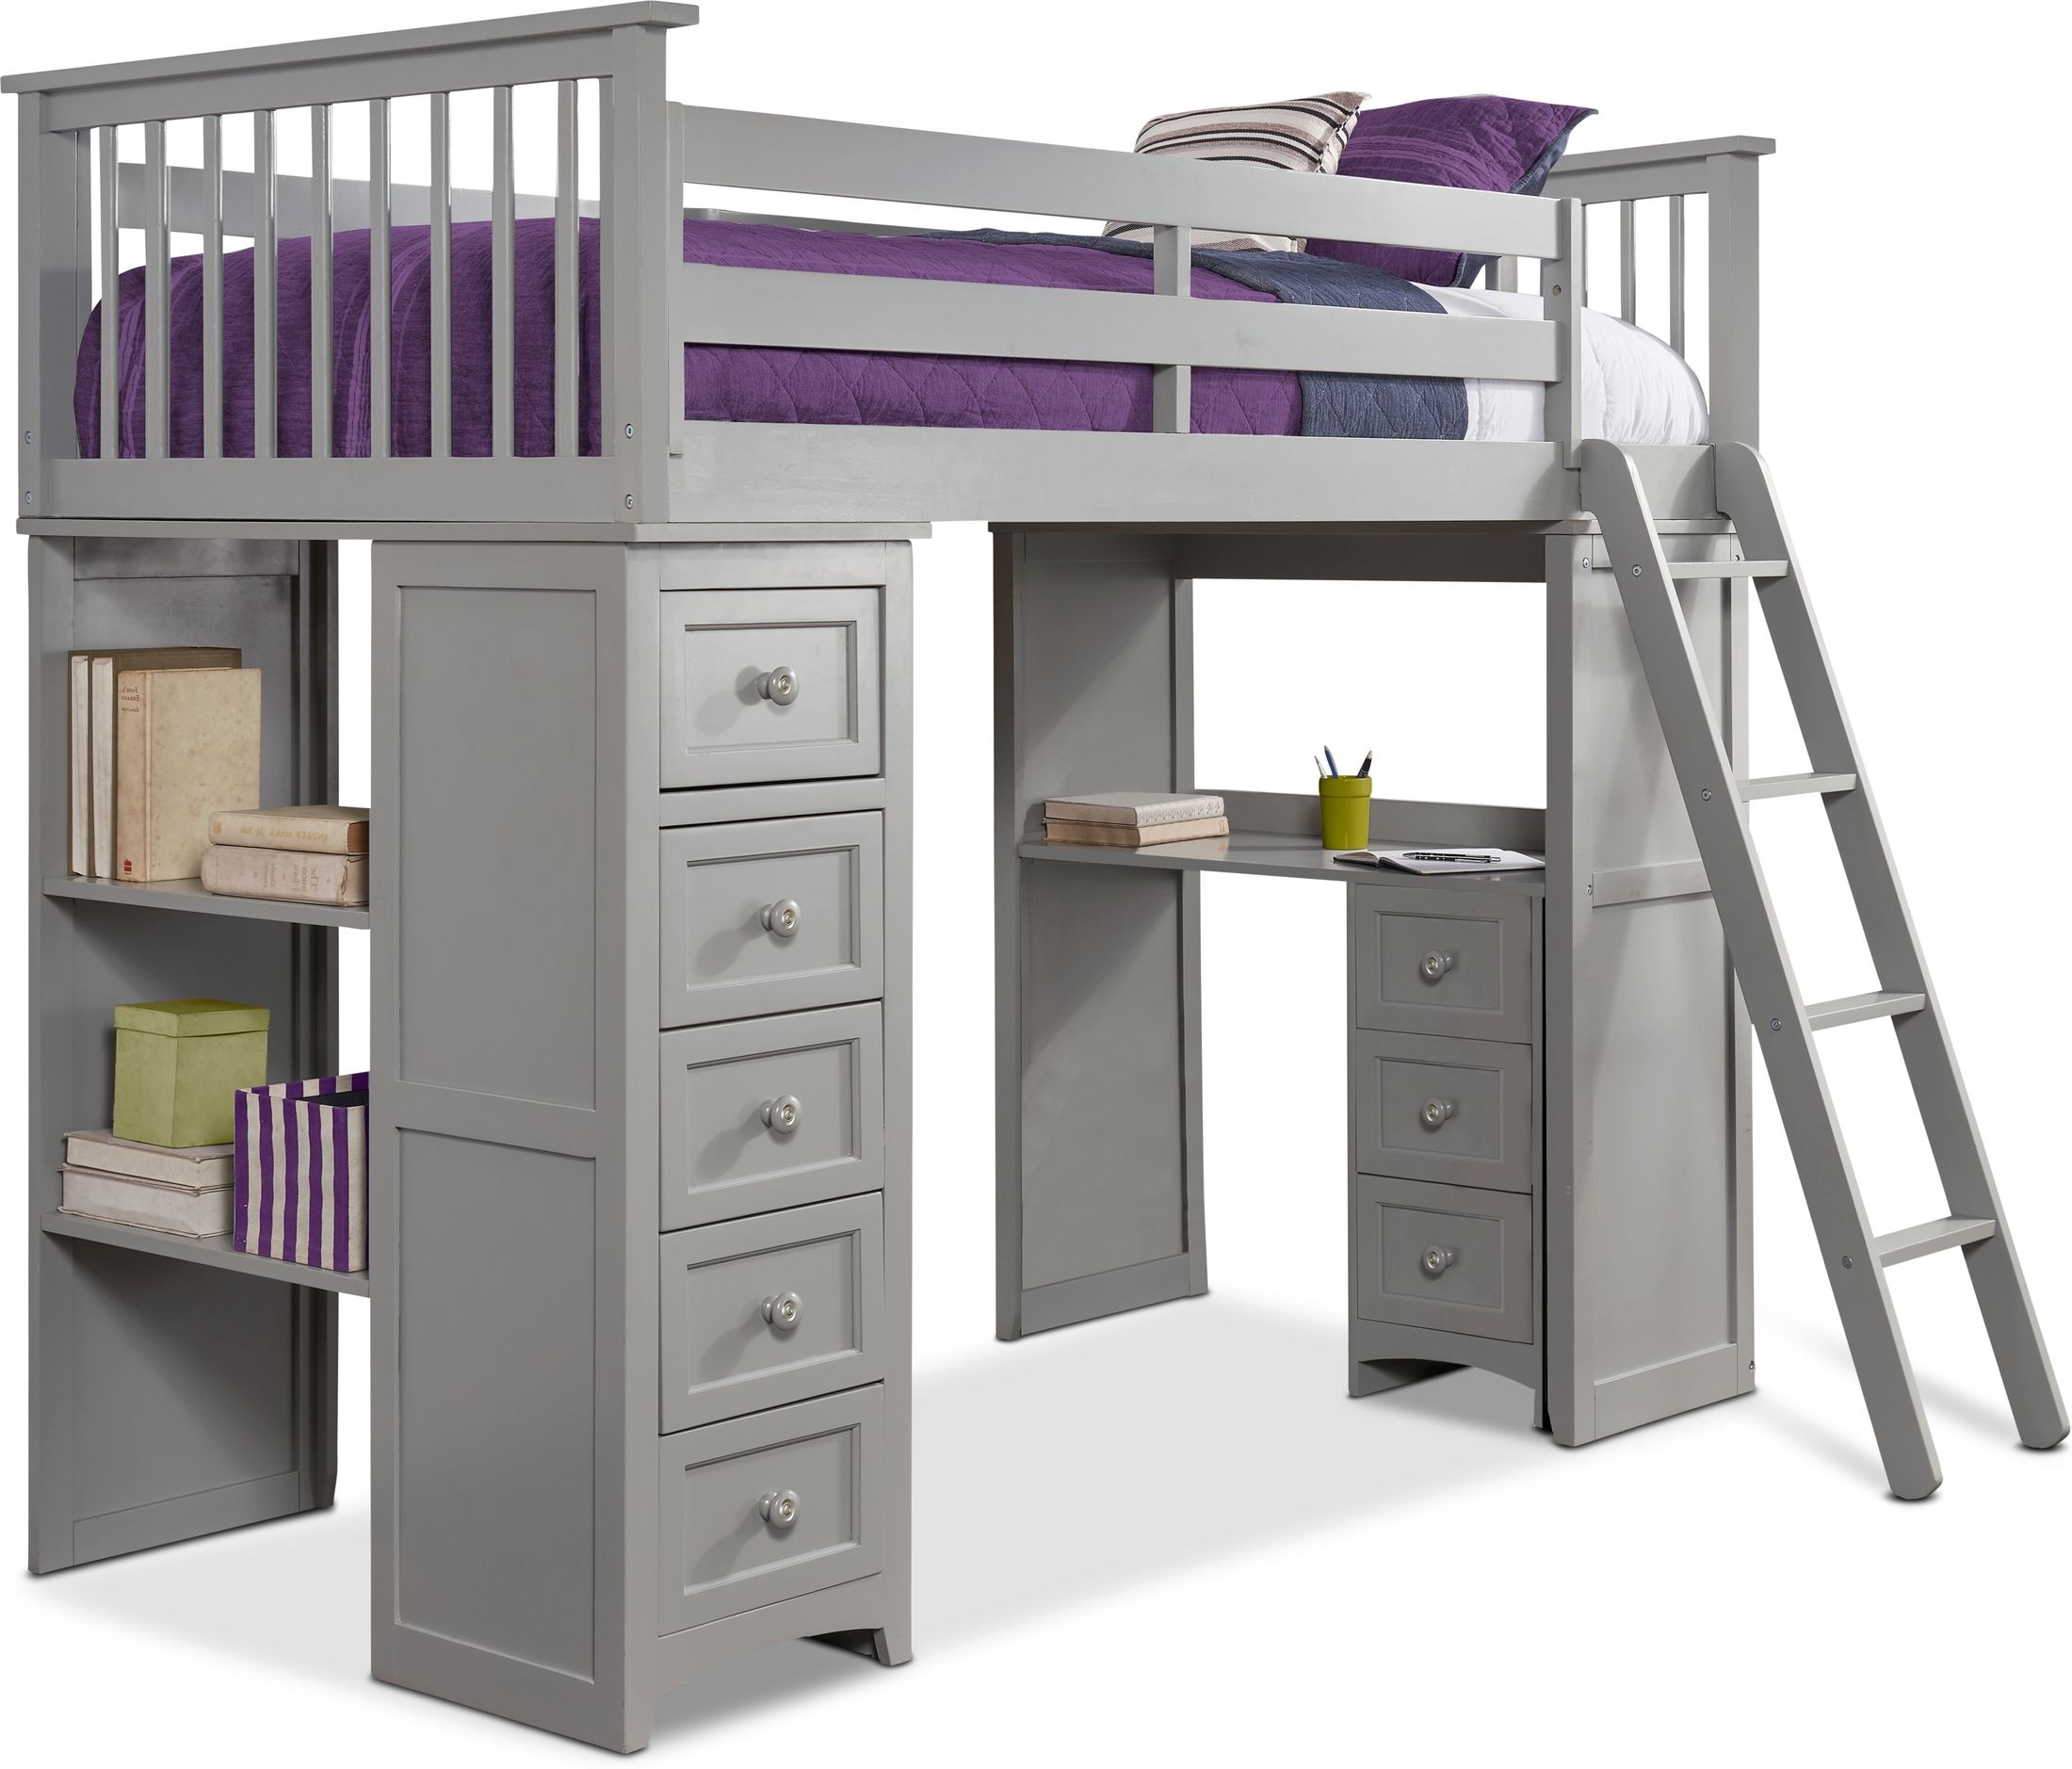 Undefined Value City Furniture, Brady Twin Full Bunk Bed With Desk